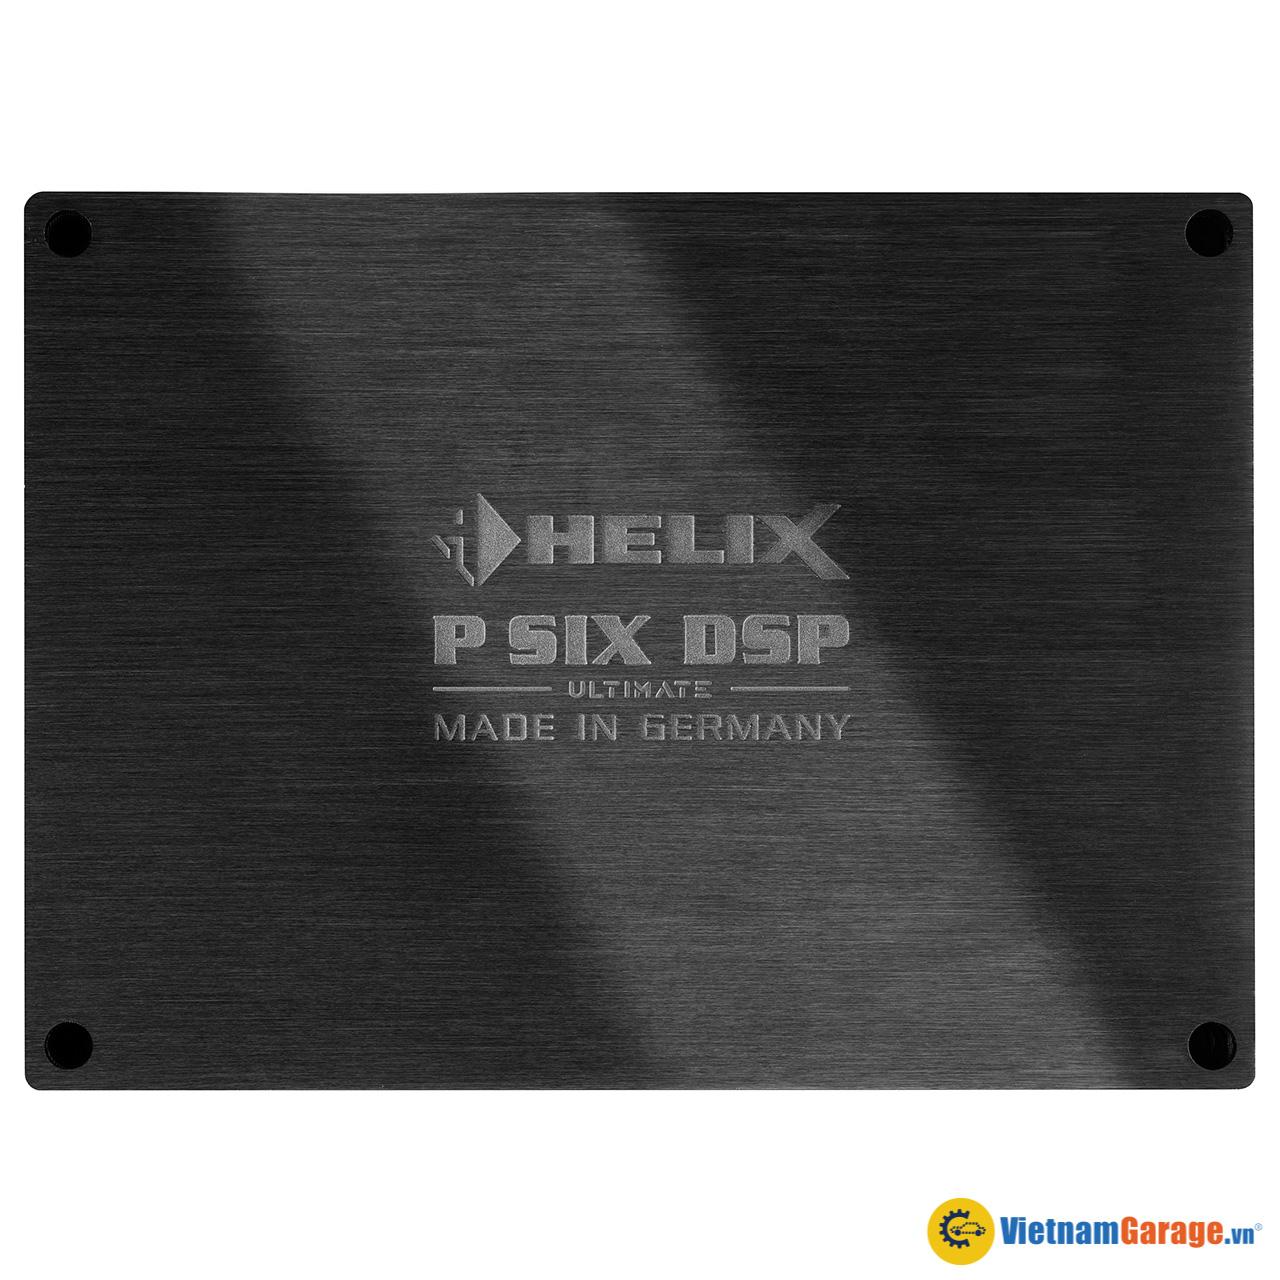 Helix P Six Dsp Ultimate 1280x1280px 29 03 2022